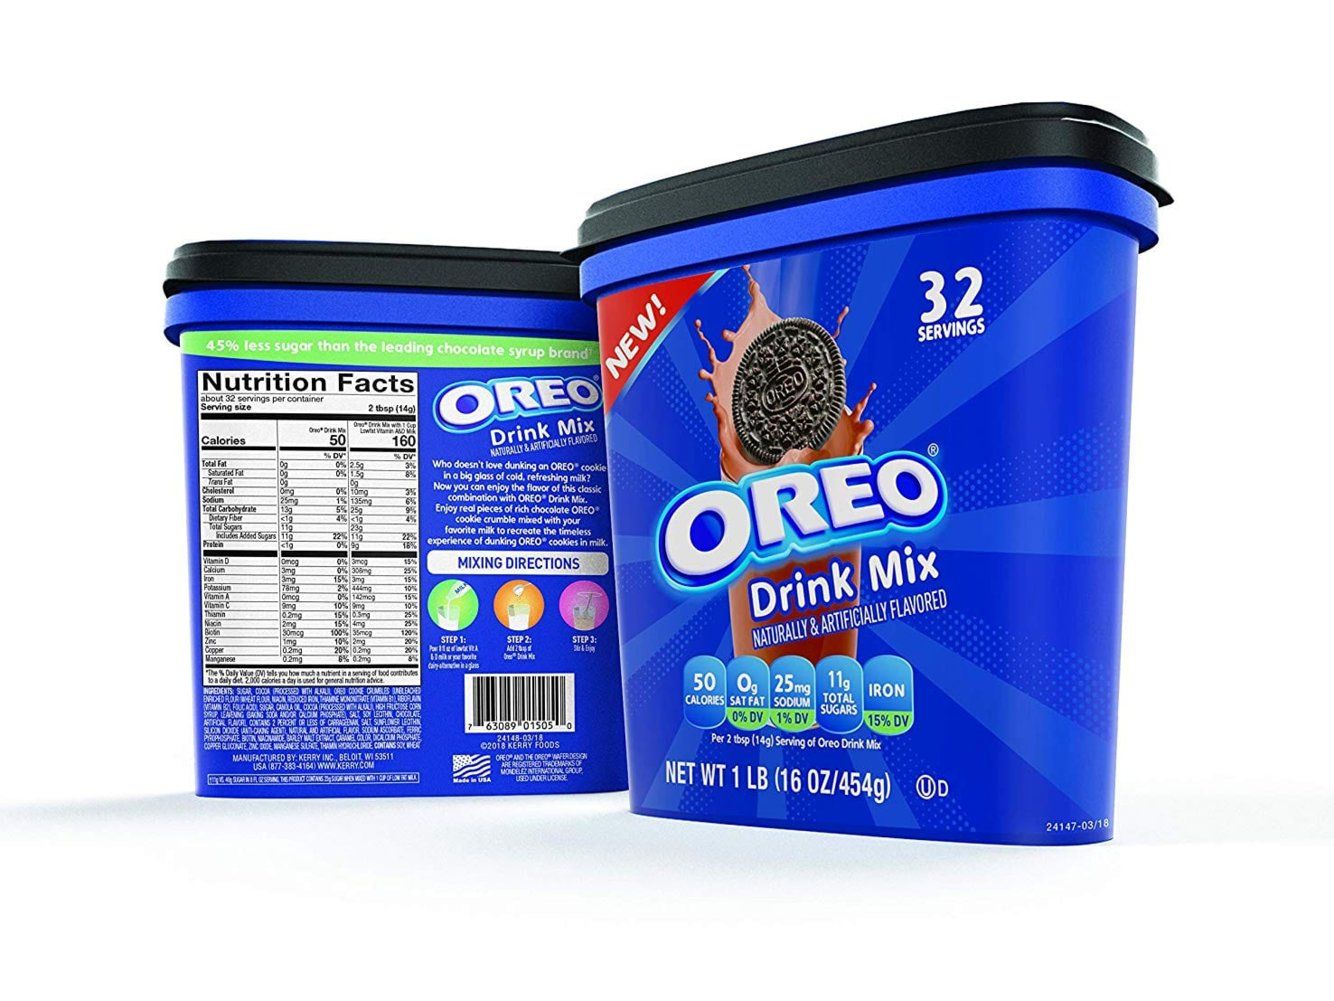 new oreo drink mix exists and will let you dunk your favorite oreos into oreos